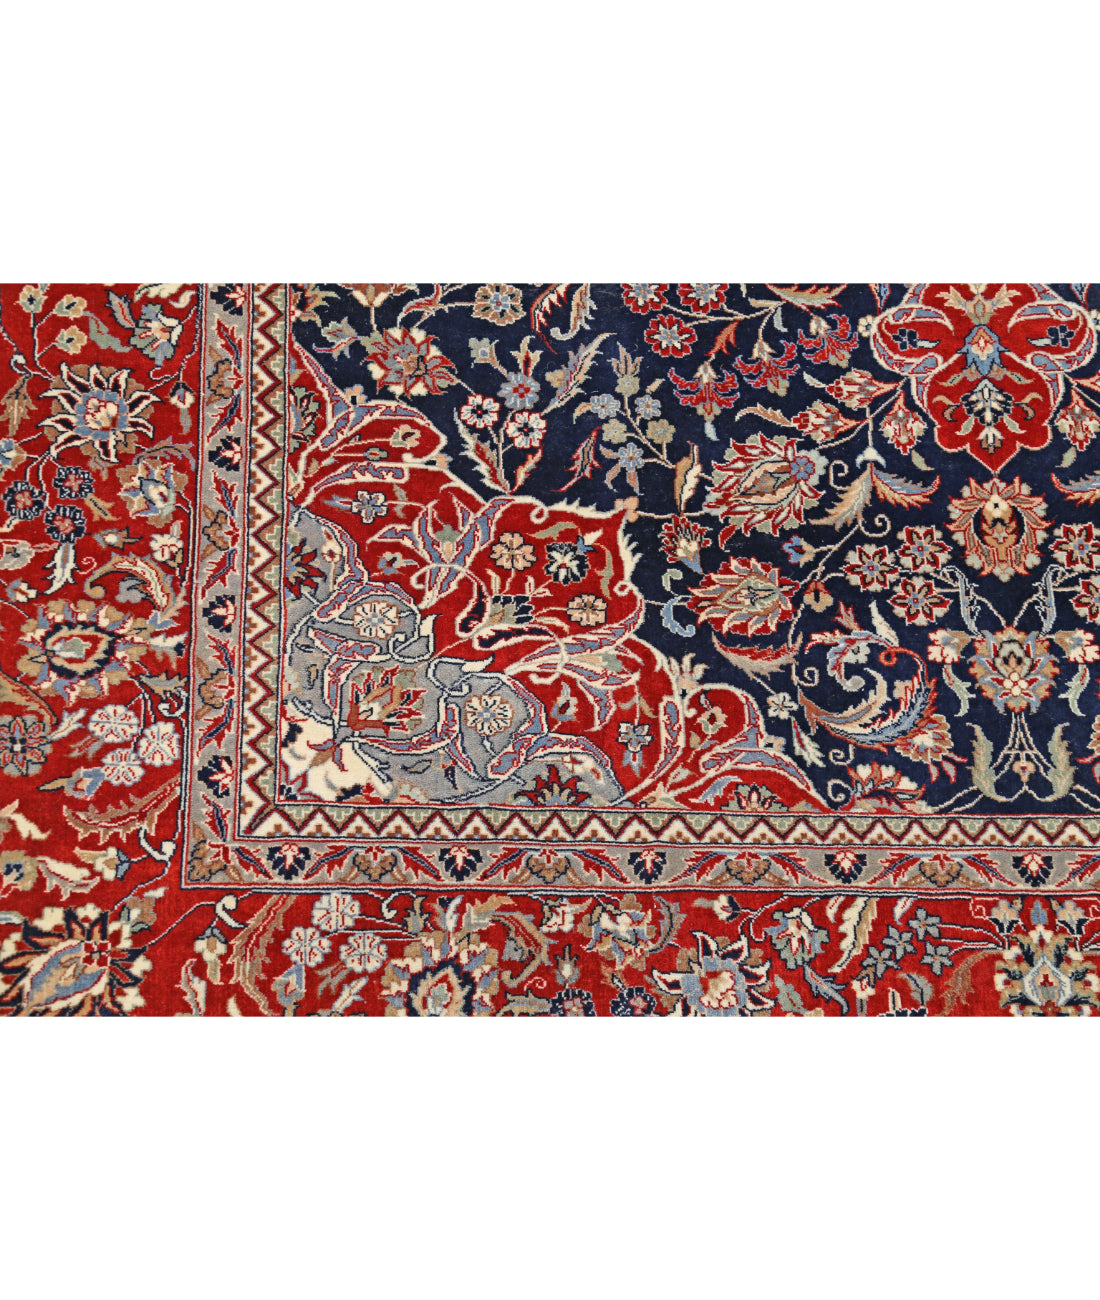 Hand Knotted Heritage Fine Persian Style Wool Rug - 6'0'' x 9'0'' 6'0'' x 9'0'' (180 X 270) / Blue / Red